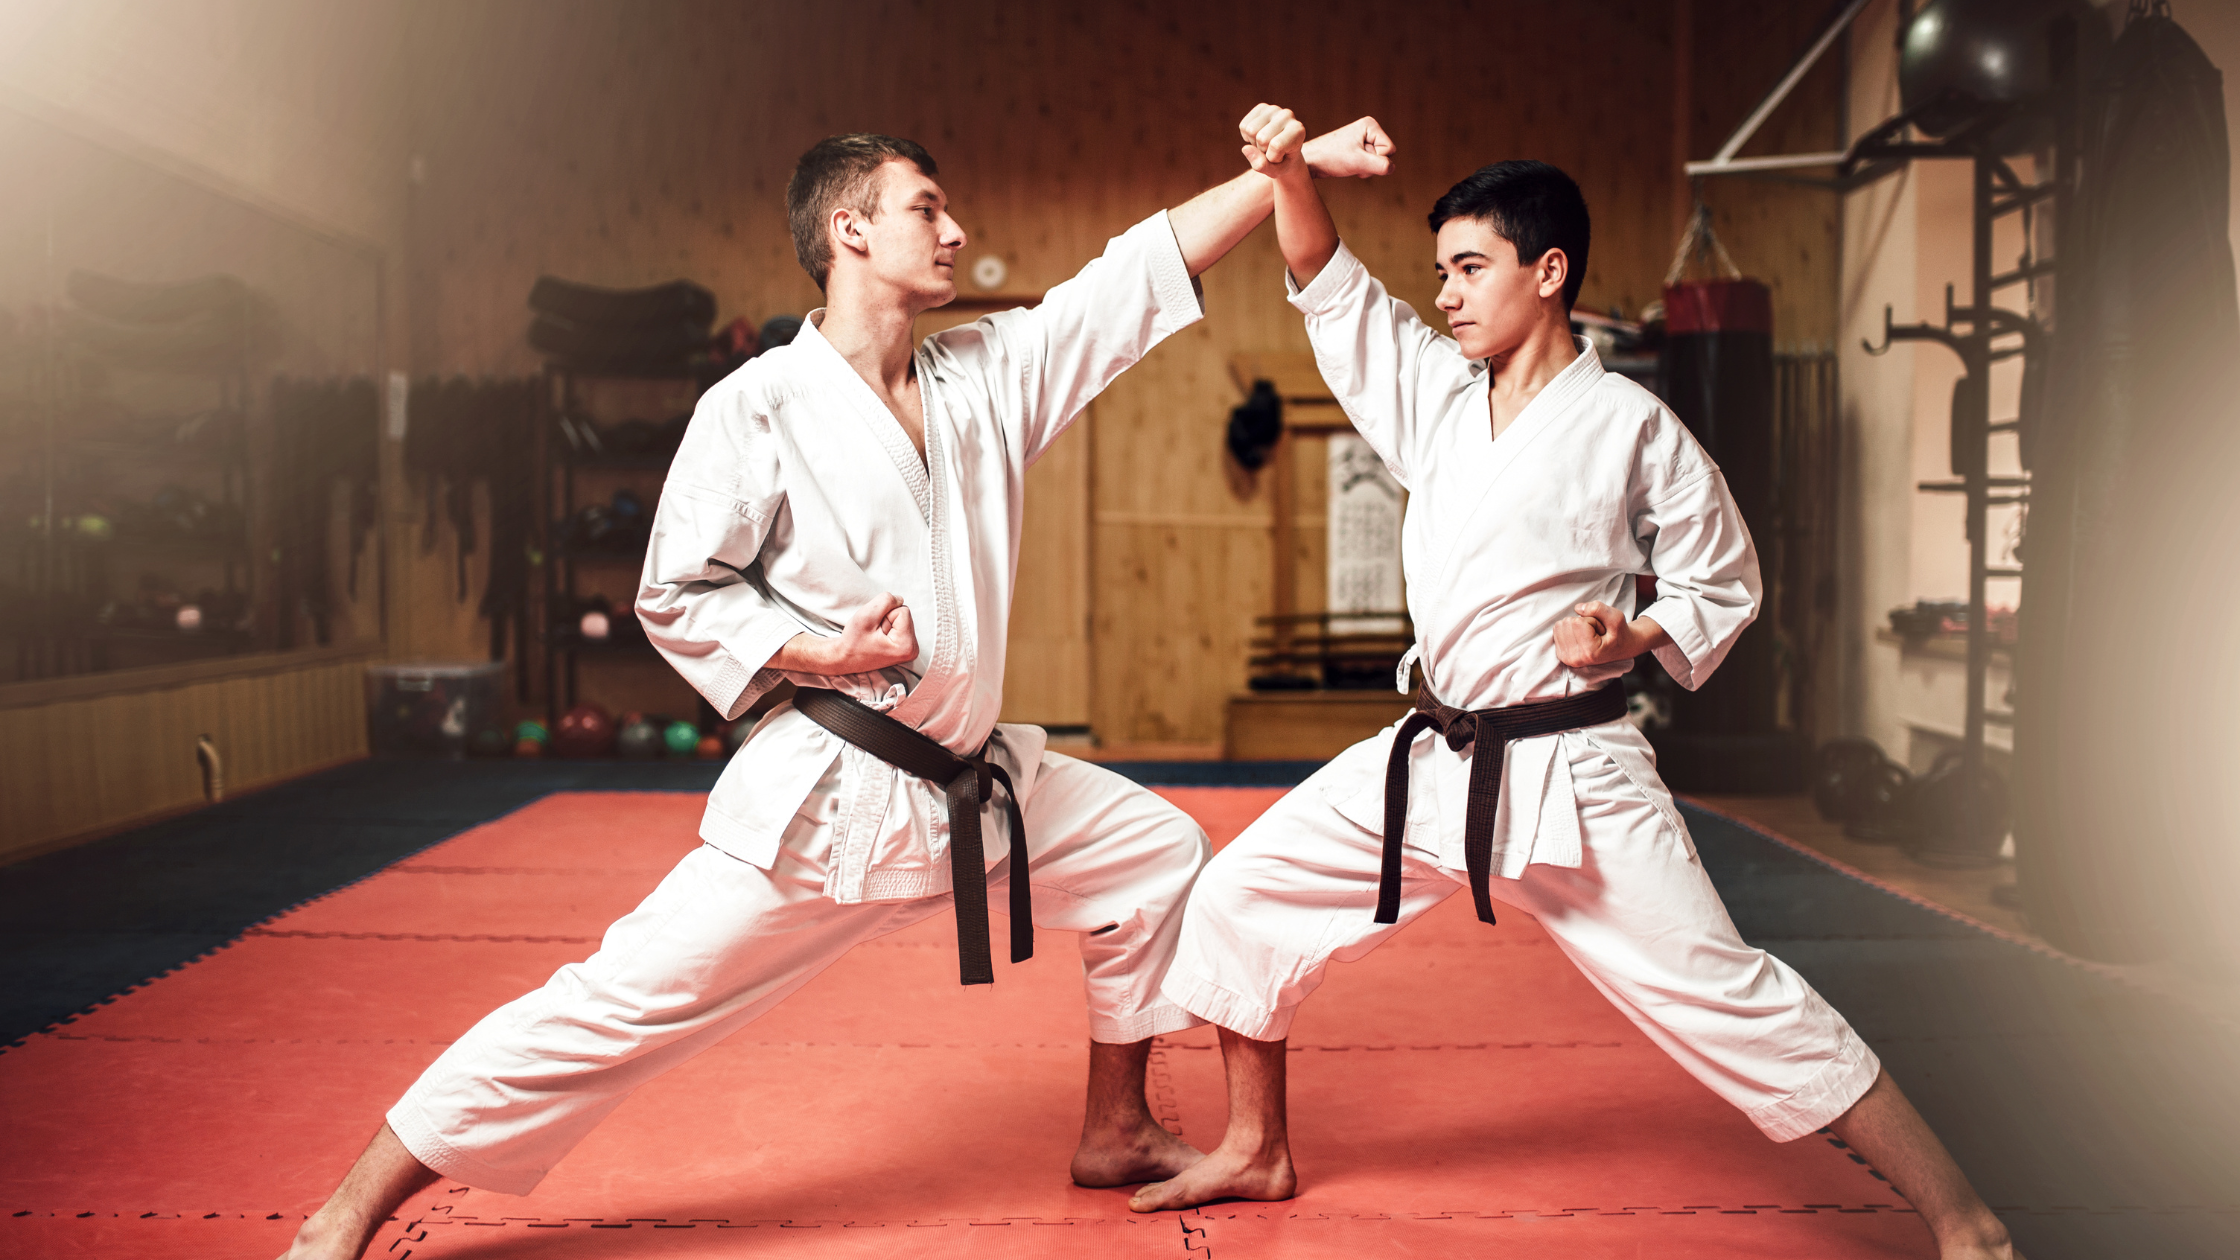 Releasing your power: The benefits of training martial arts